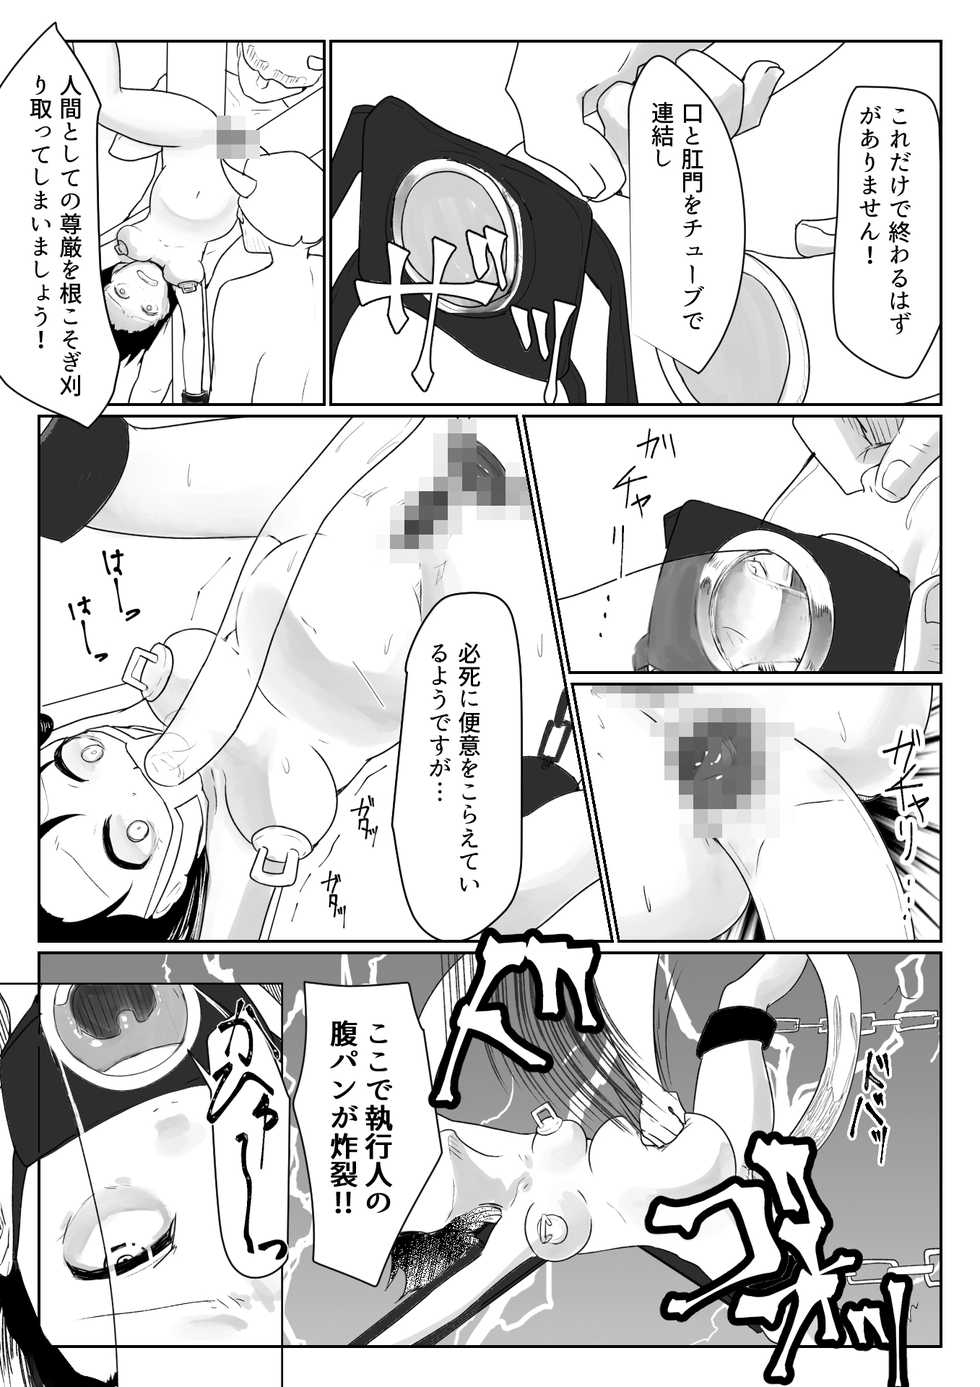 [Dejimeshi] "Someone help me" ~ Lori abducted genitals and mental destruction ~ - Page 30